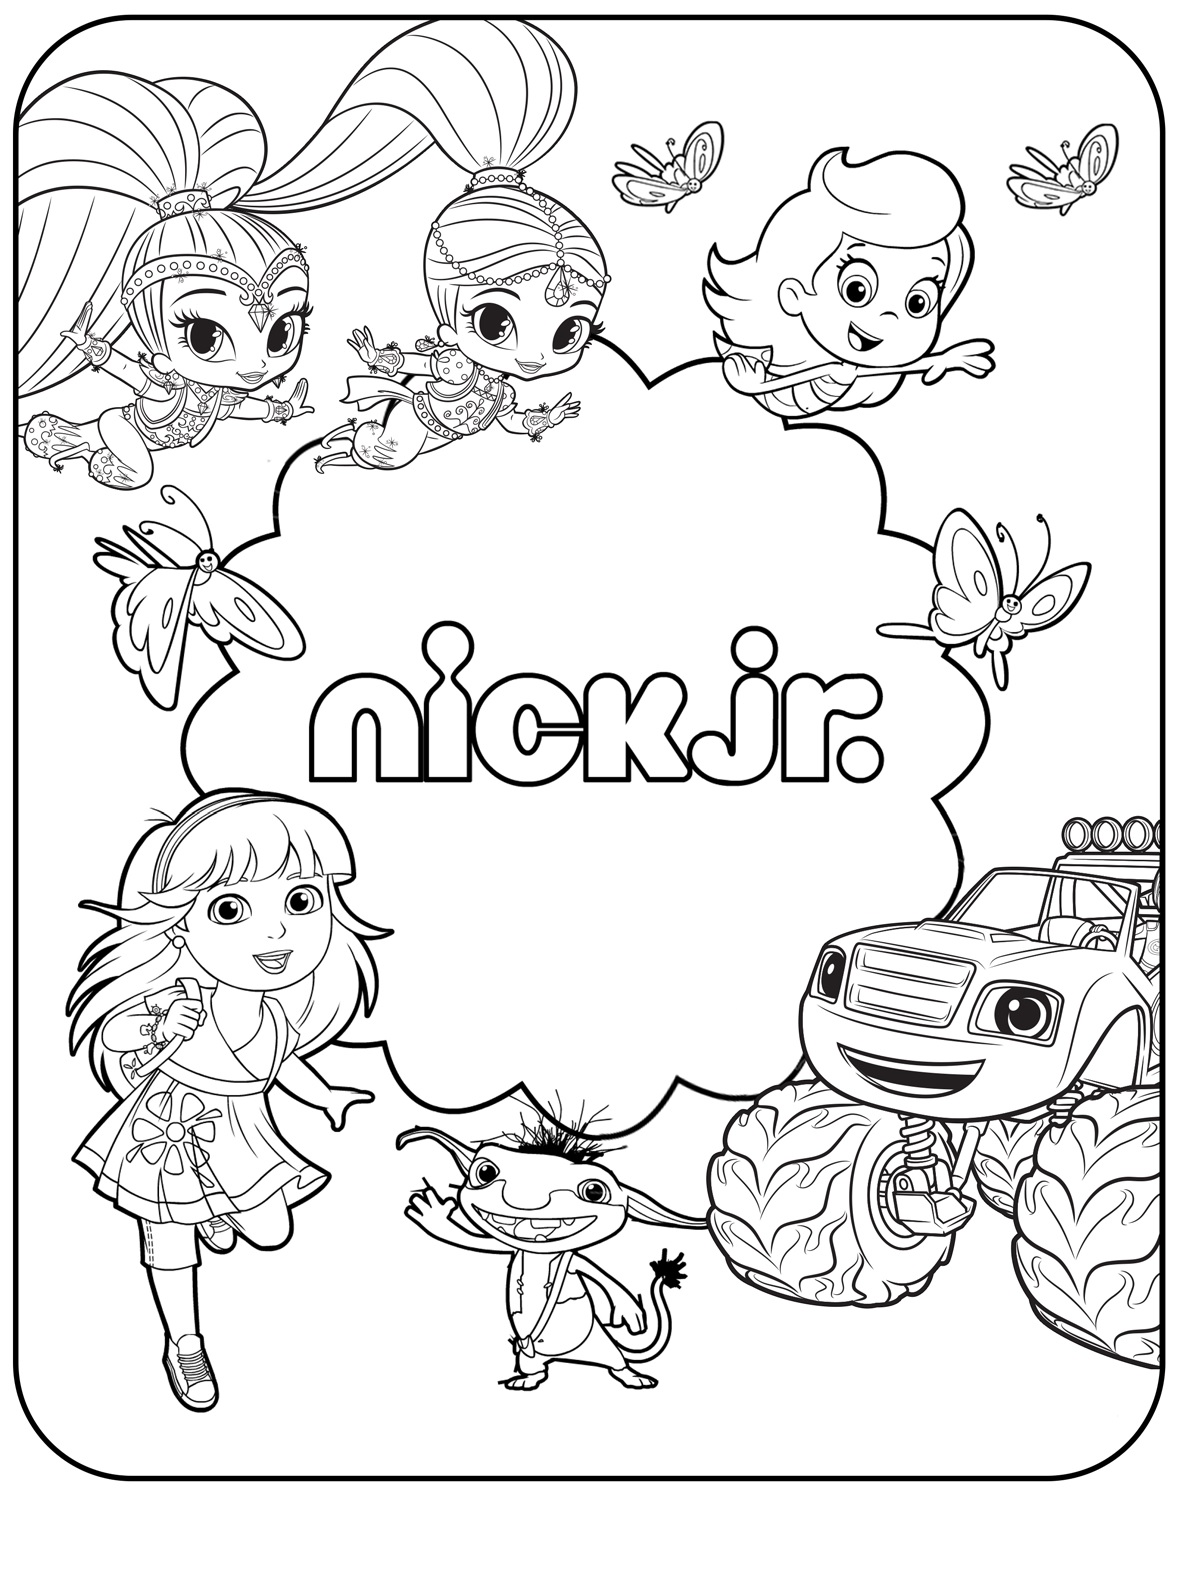 nick jr coloring pages games for girls - photo #6